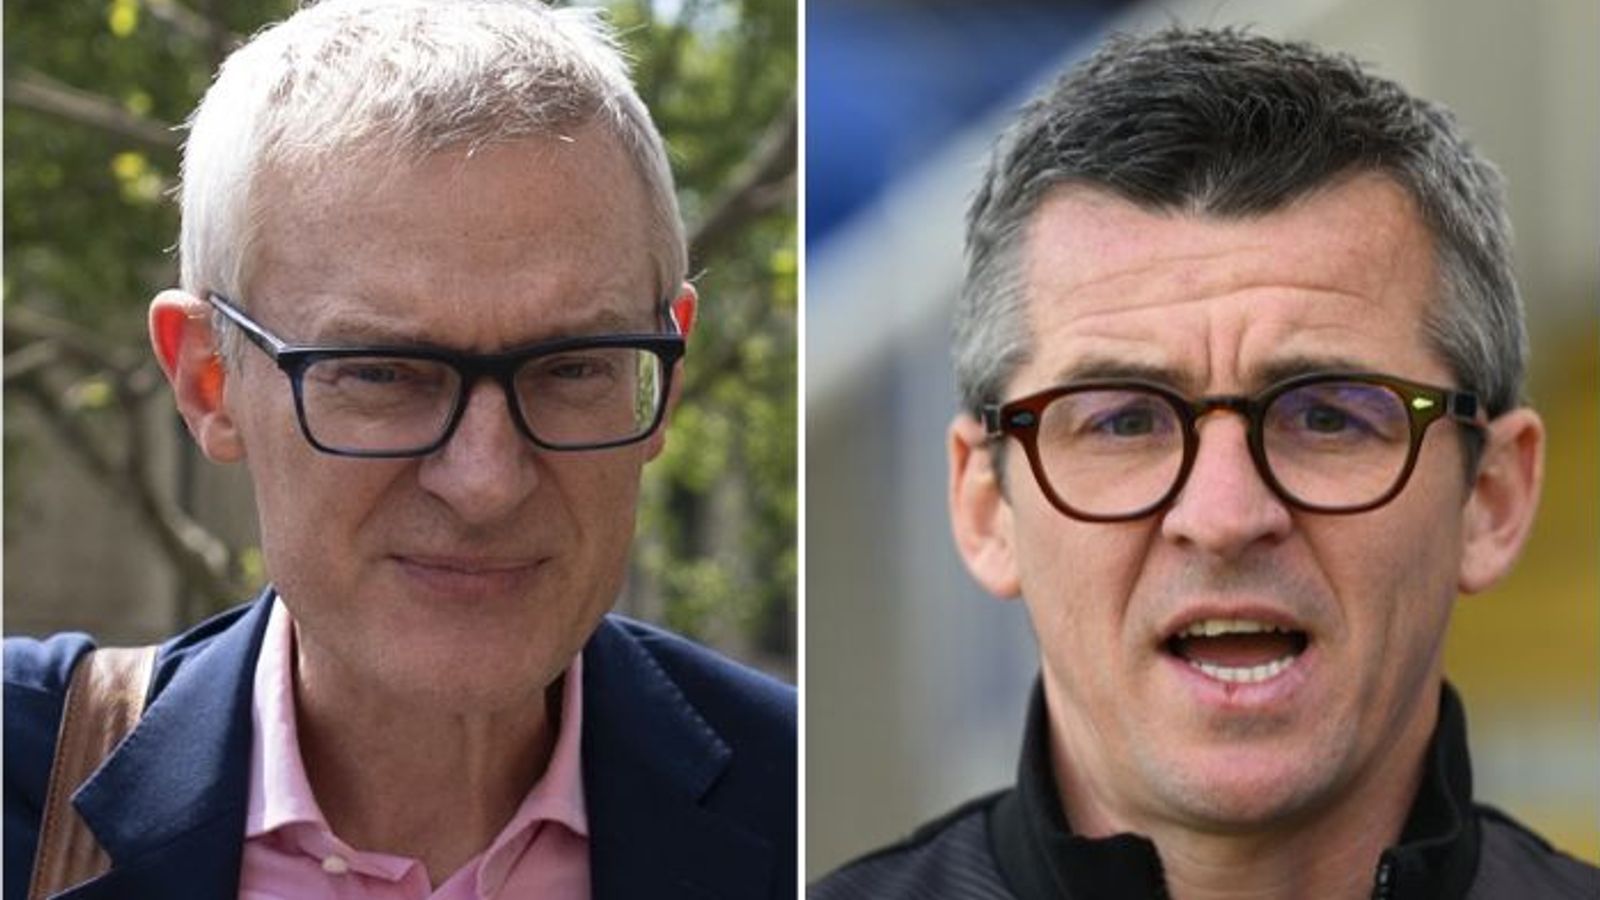 Joey Barton apologises and agrees to pay damages to Jeremy Vine over online slurs